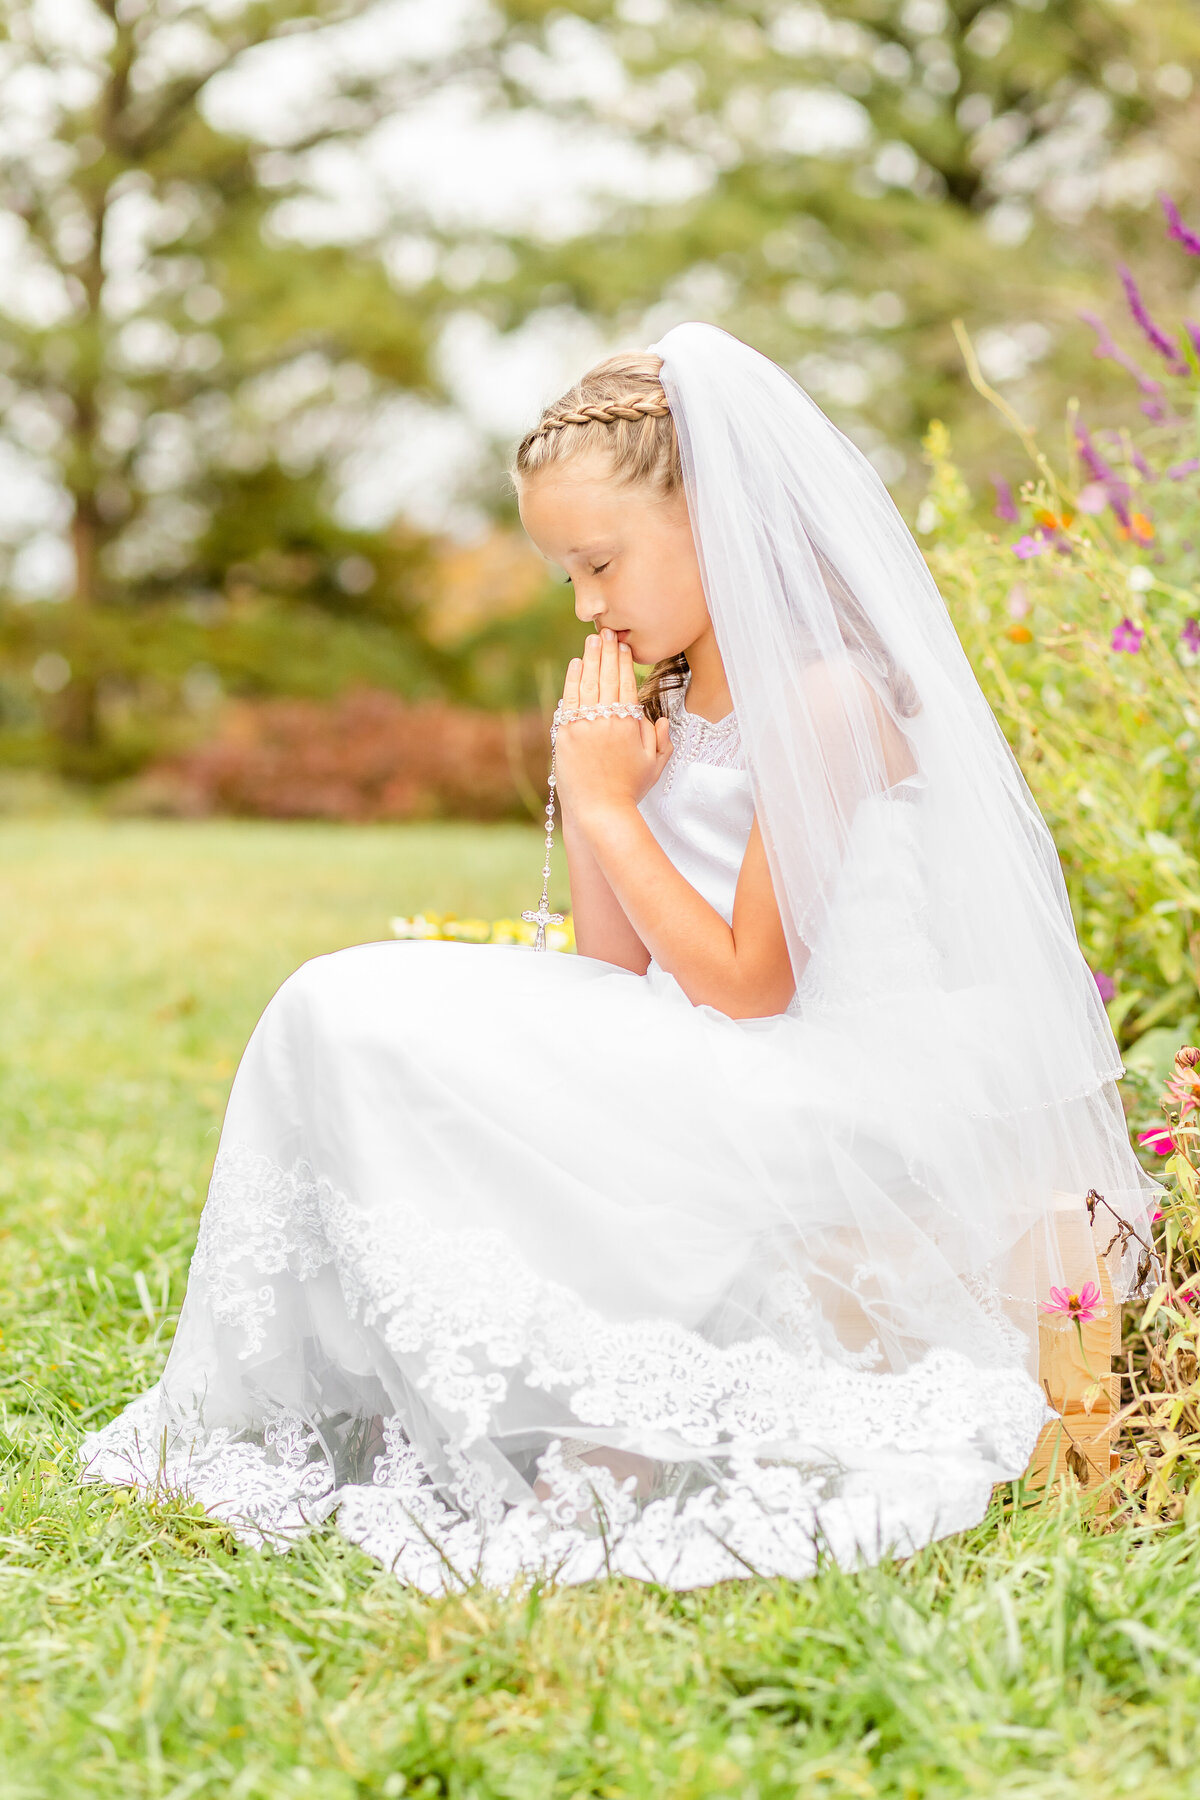 First communion girl praying in flowers